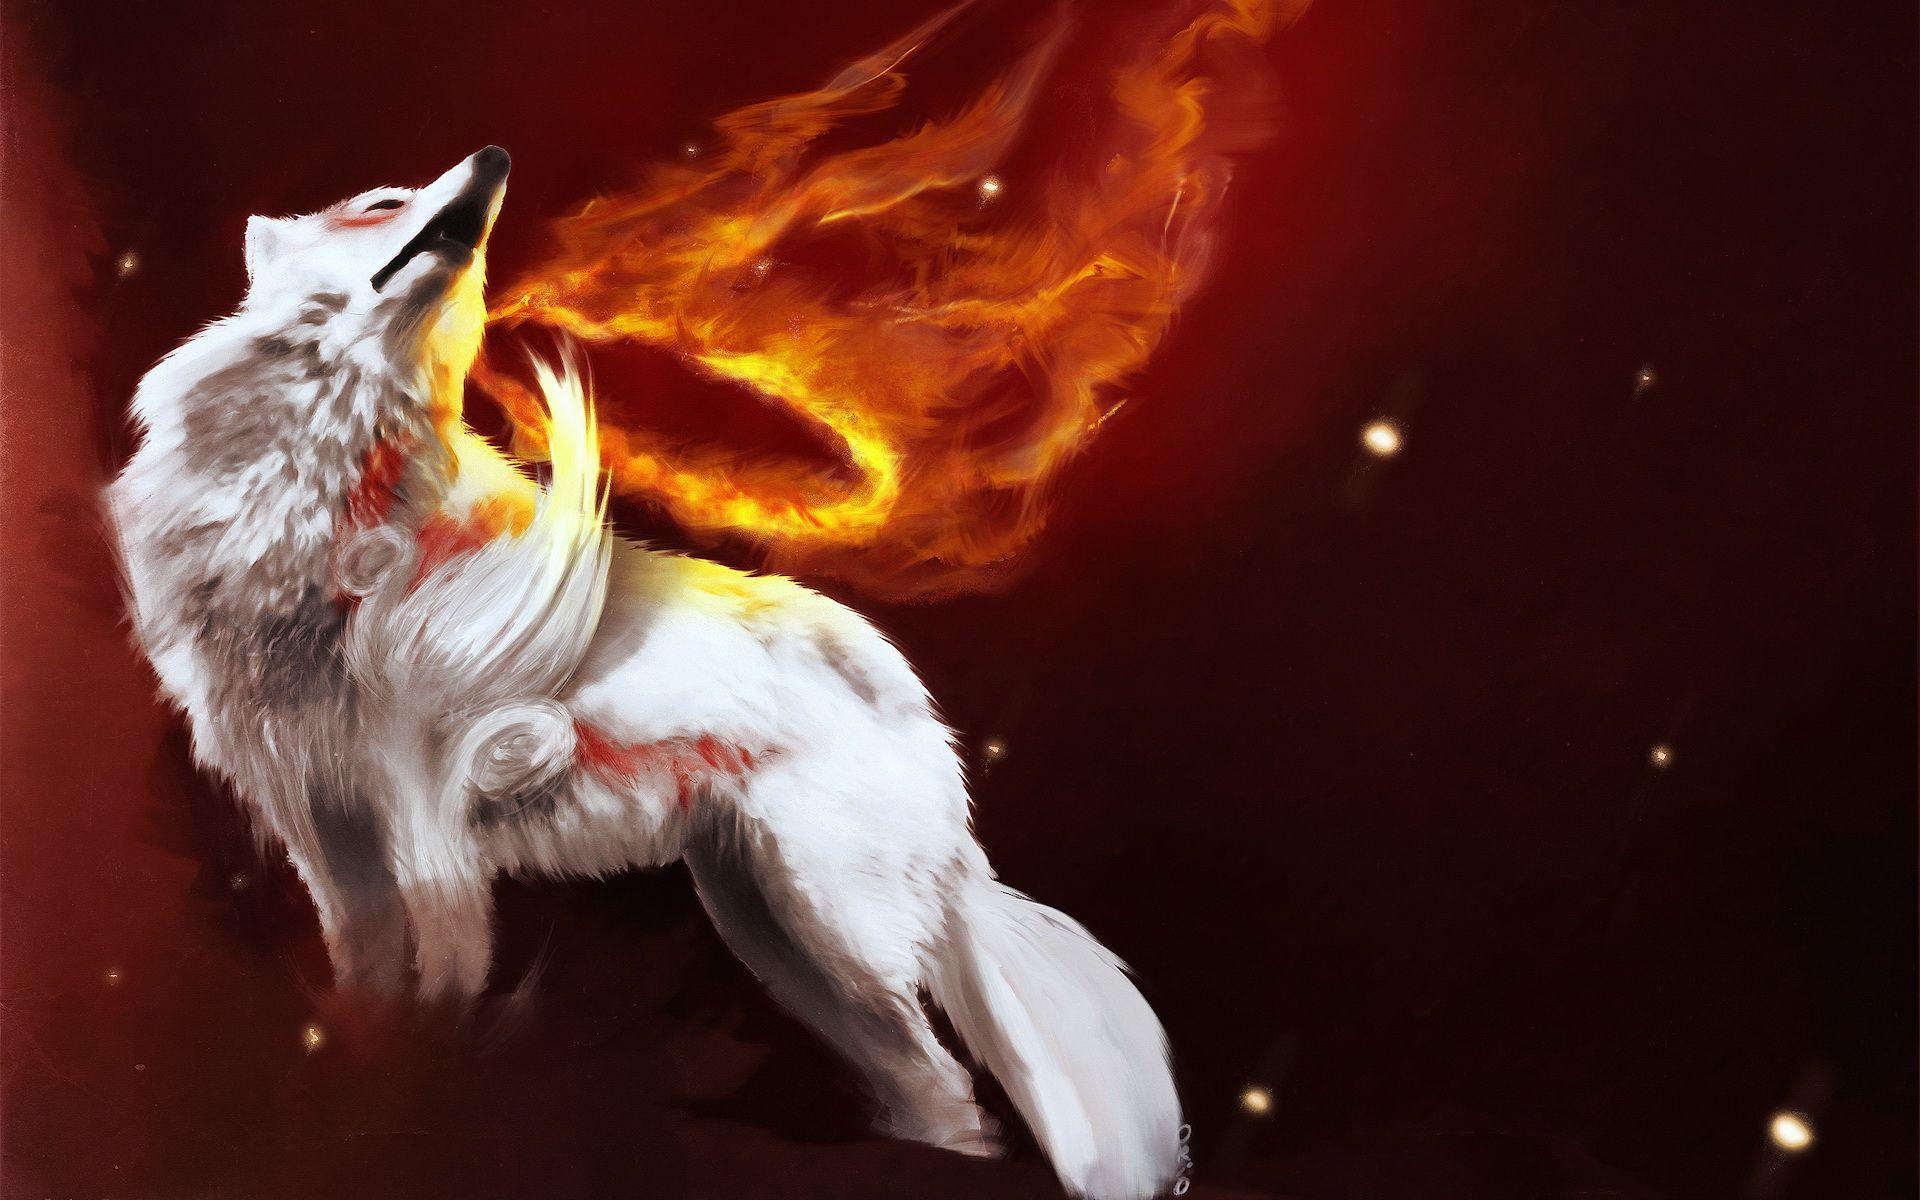 Okami, Video Games Wallpapers HD / Desktop and Mobile Backgrounds.